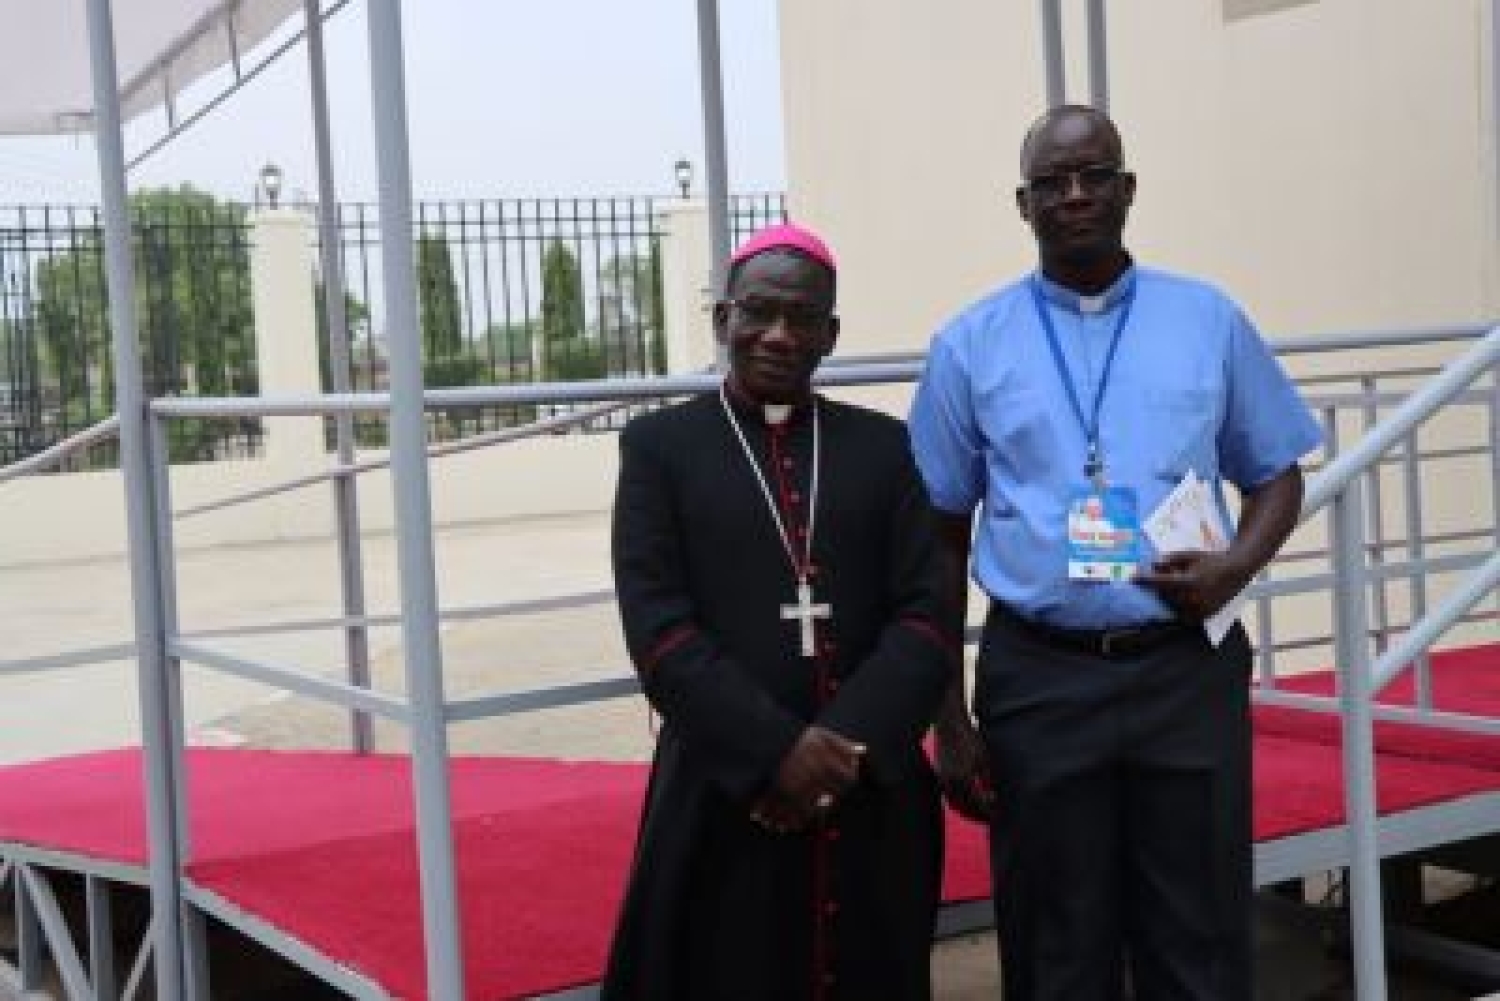 PAPAL VISIT SOUTH SUDAN: Liturgically Prepared, Ready to Welcome the Holy Father